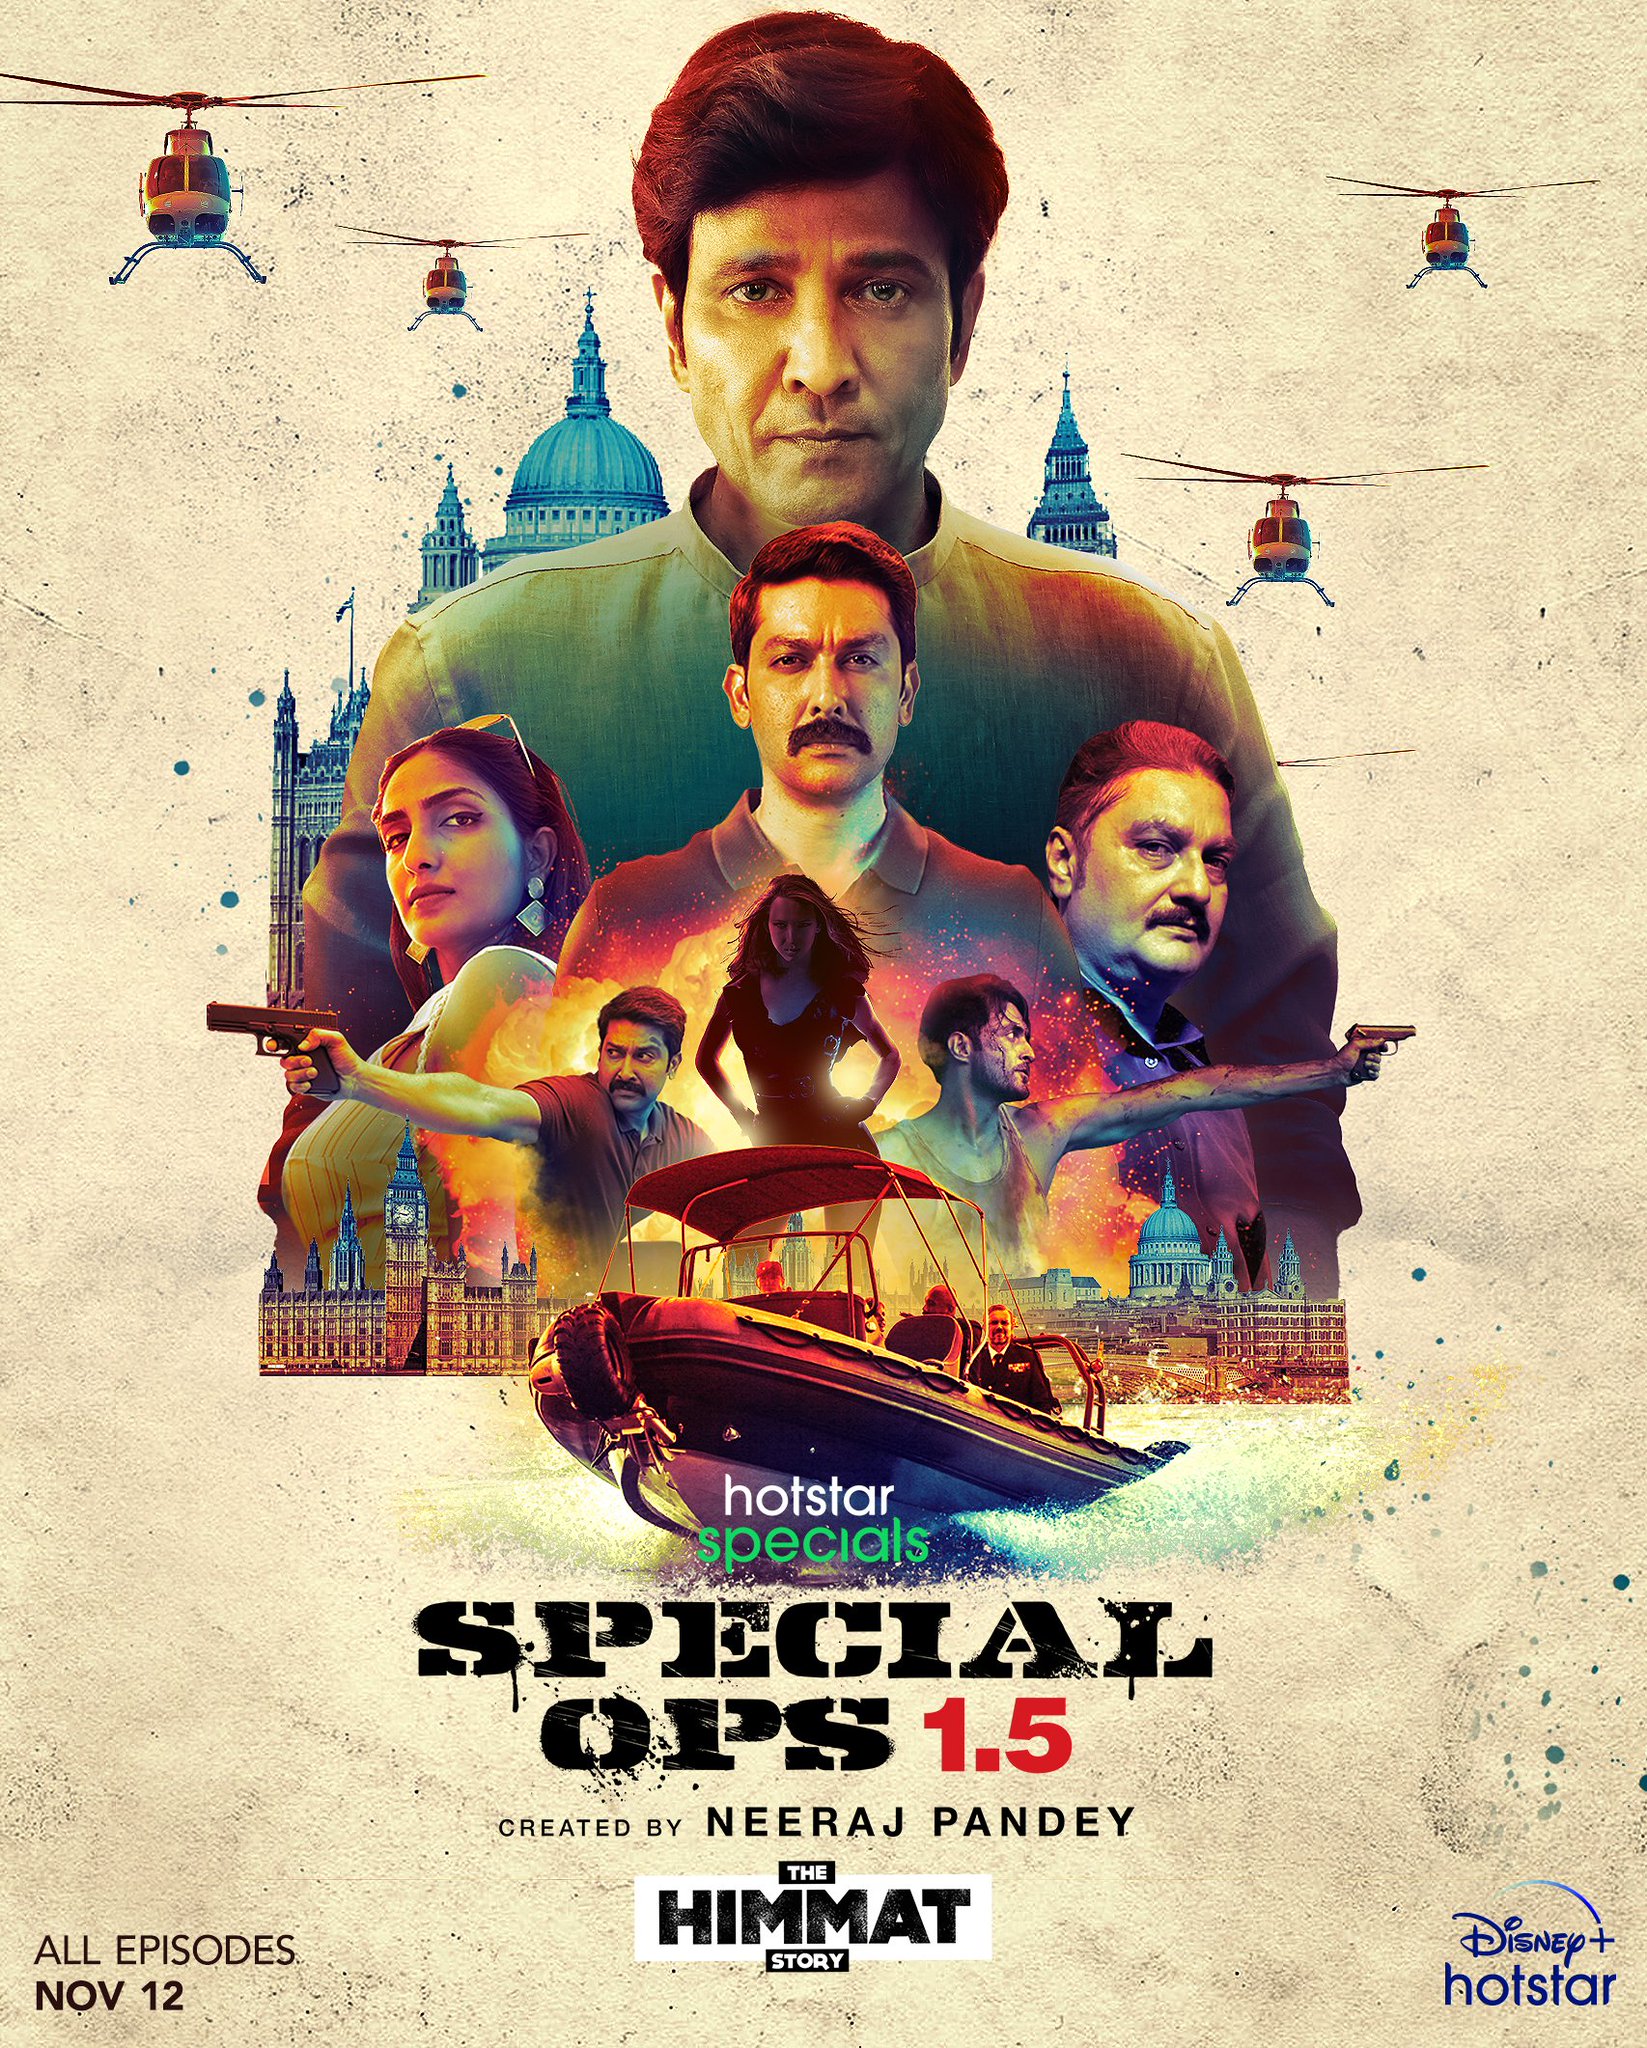 Special Ops 1 5 The Himmat Story 2021 Hotstar Web Series 15183 Poster.jpg